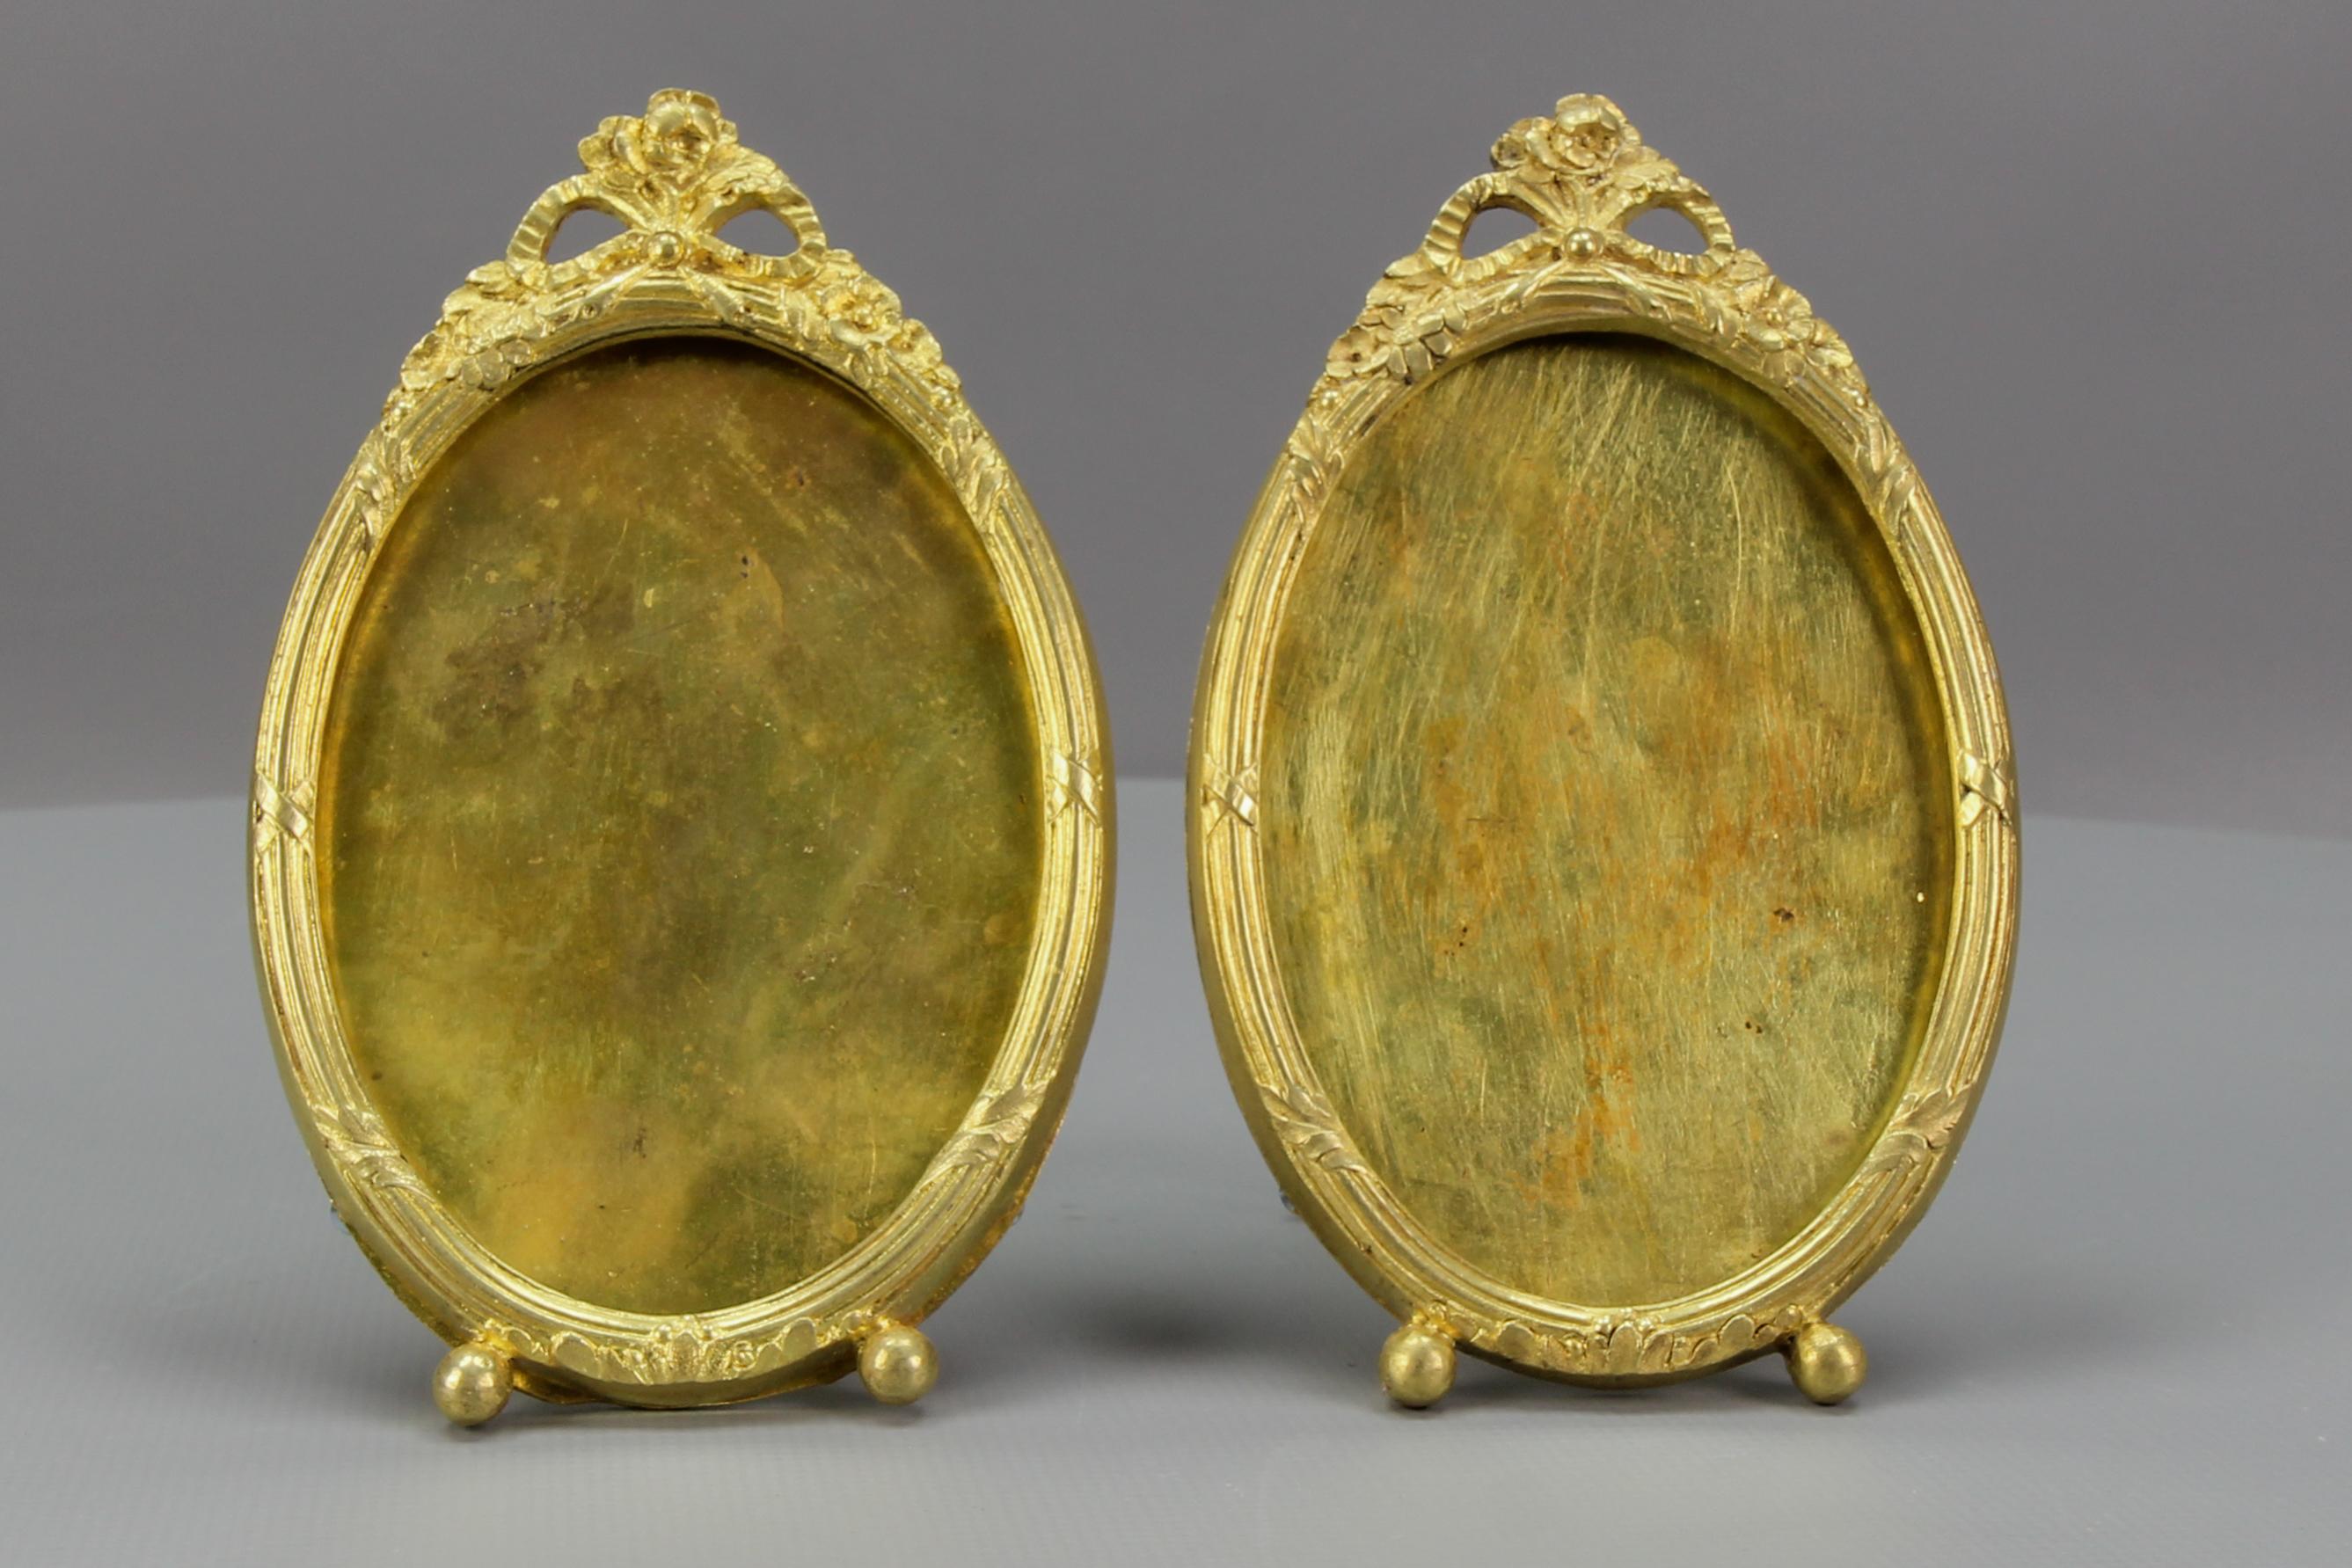 A pair of French Louis XVI-style oval bronze photo or picture desktop easel frames from circa the 1900s.
This adorable pair of picture frames is made of bronze and brass and has an easel supporting leg on the back. Decorated with flowers and a bow